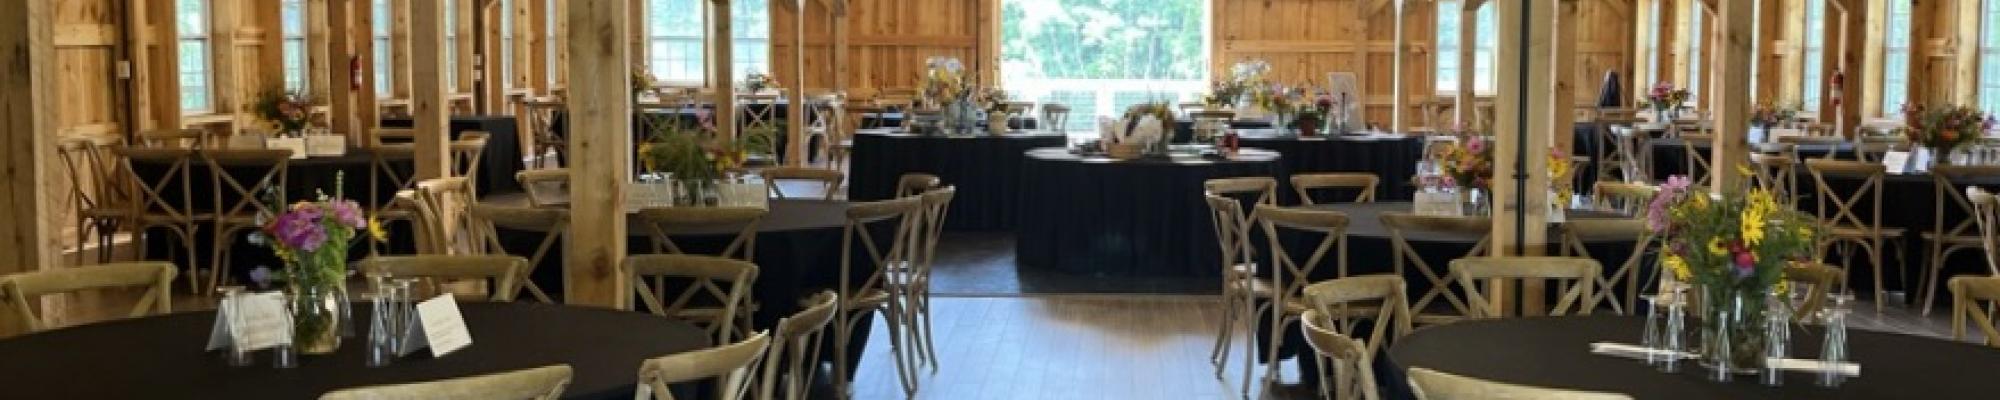 Image of decorated Barn at Union Grove Farm ready for the party.